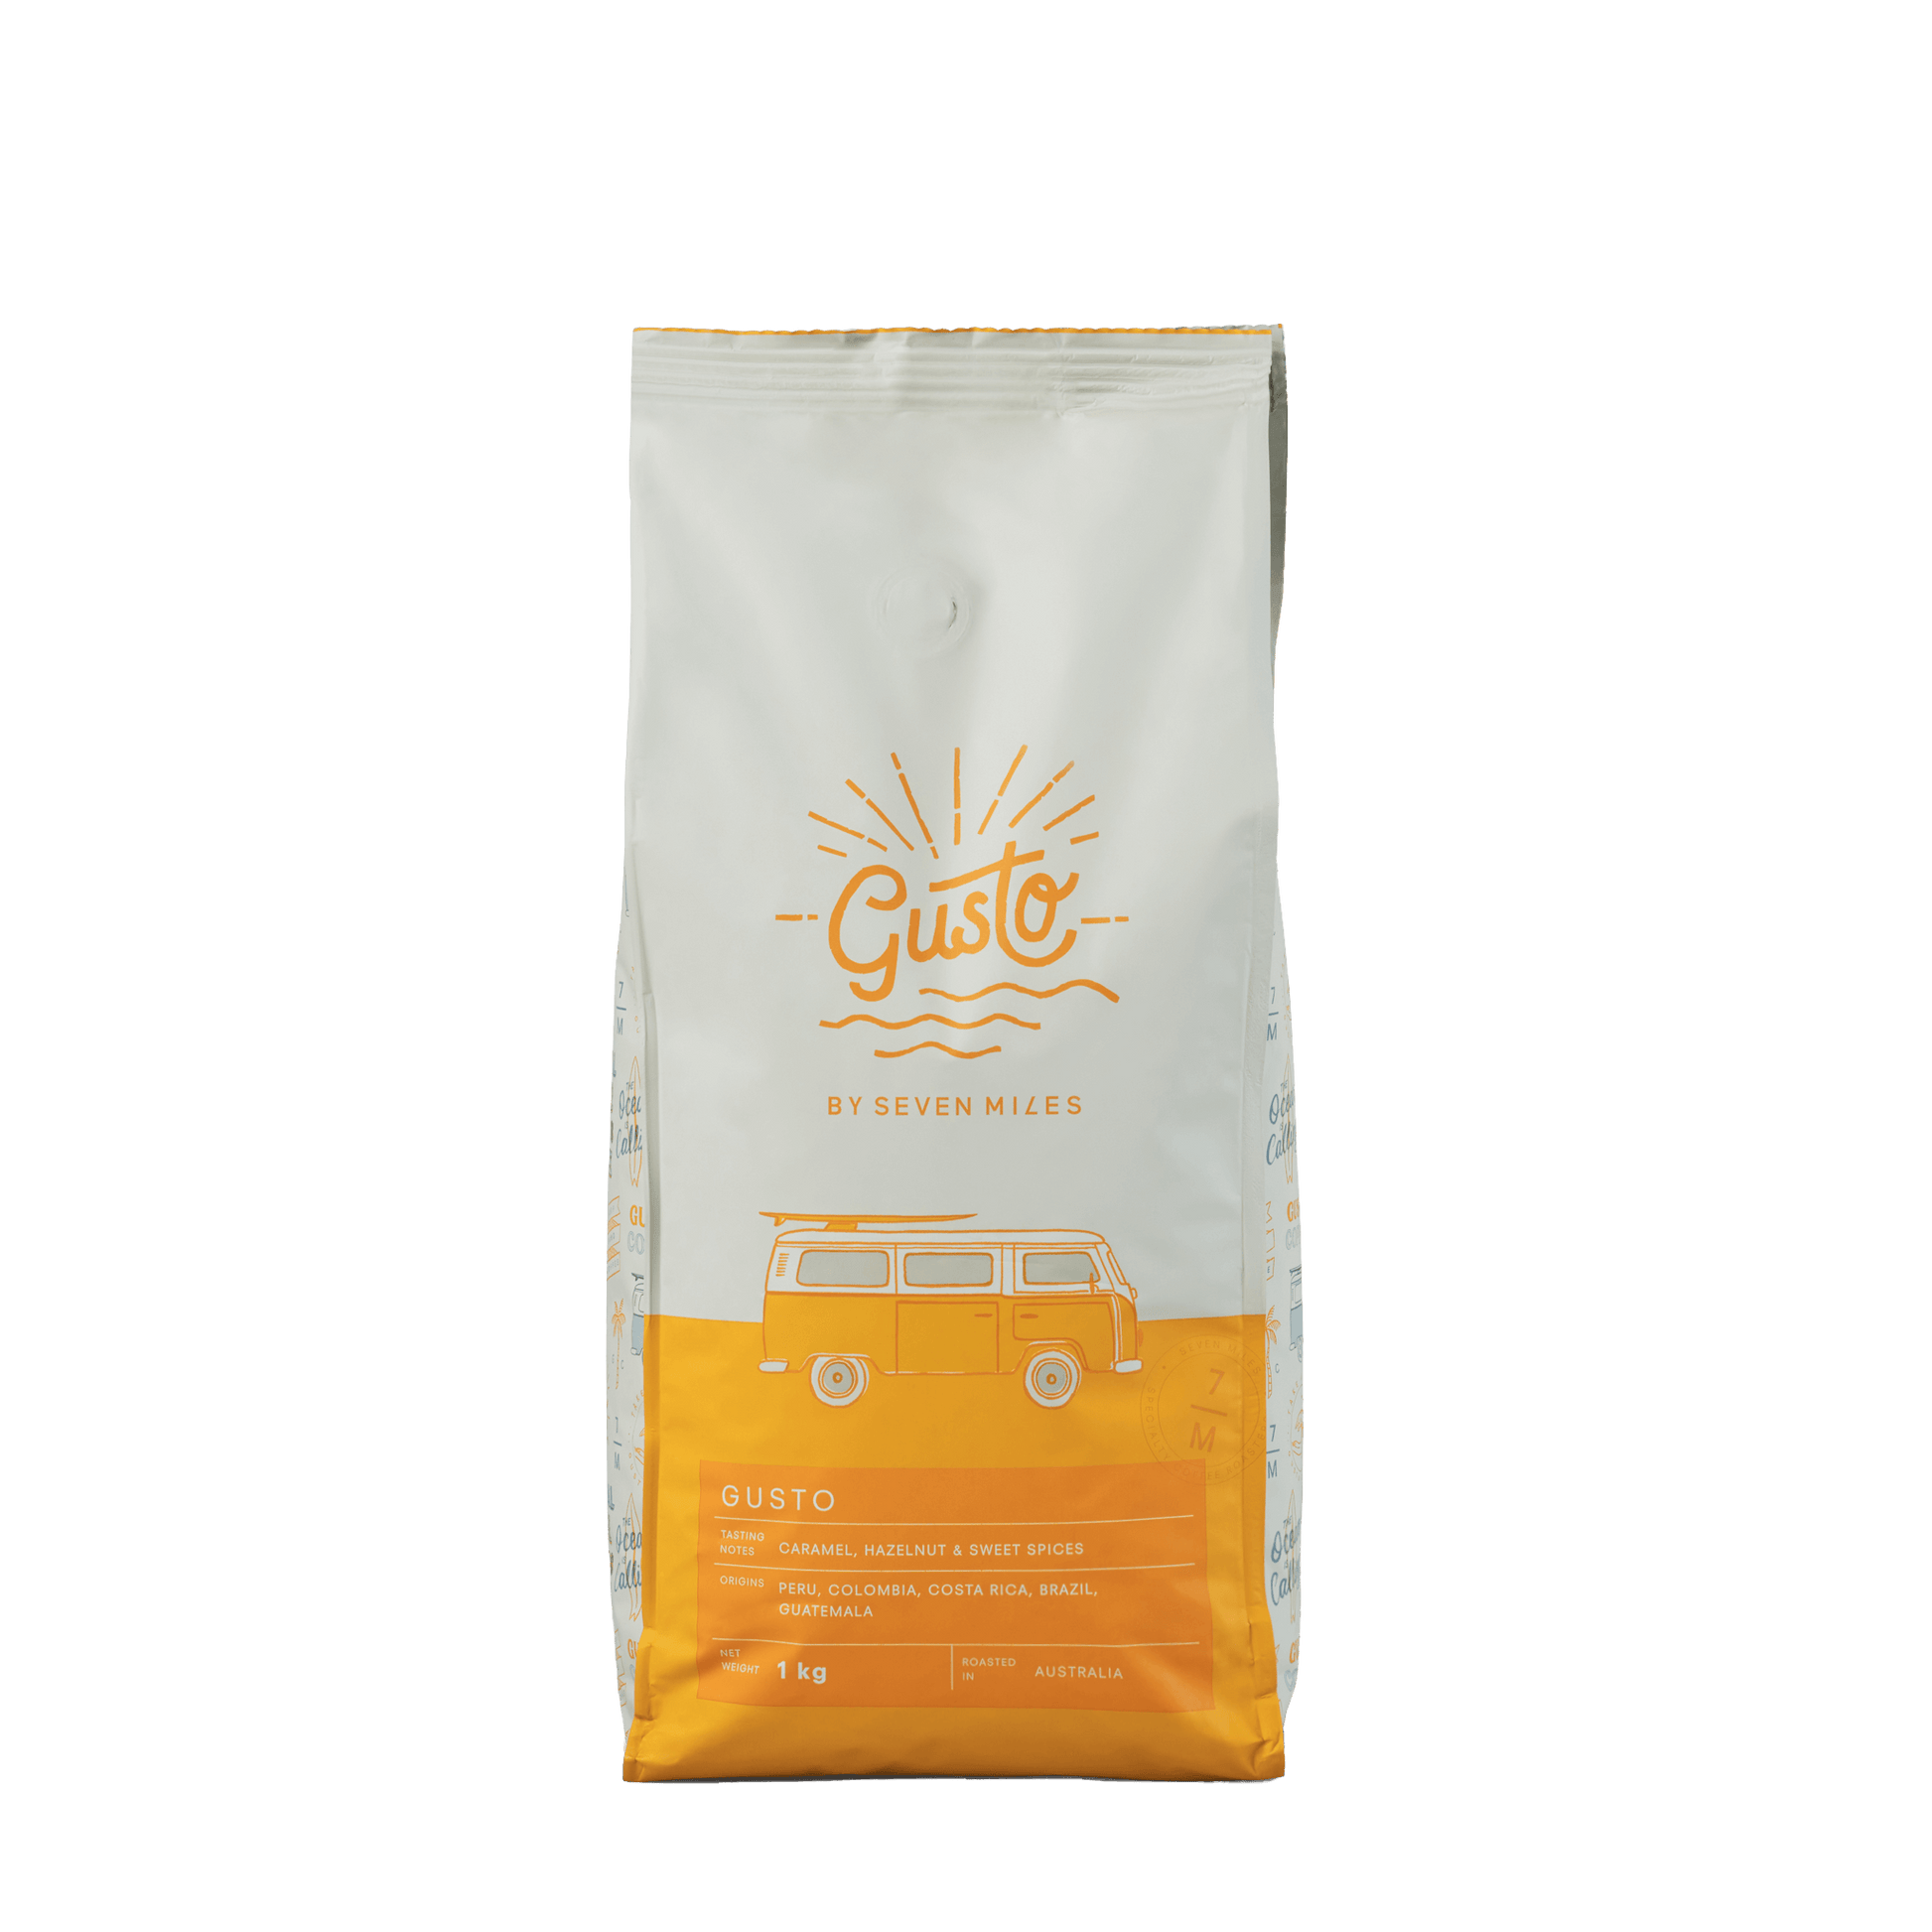 The Seven Miles Gusto 1kg coffee blend features the smooth, sweet flavours of the best Latin American coffee beans. Gusto is intense but smooth with tasting notes of Caramel, Hazelnut & Sweet Spices. As a flat white, latte or cappuccino, it makes a beautiful milk coffee with the flavours cutting through.